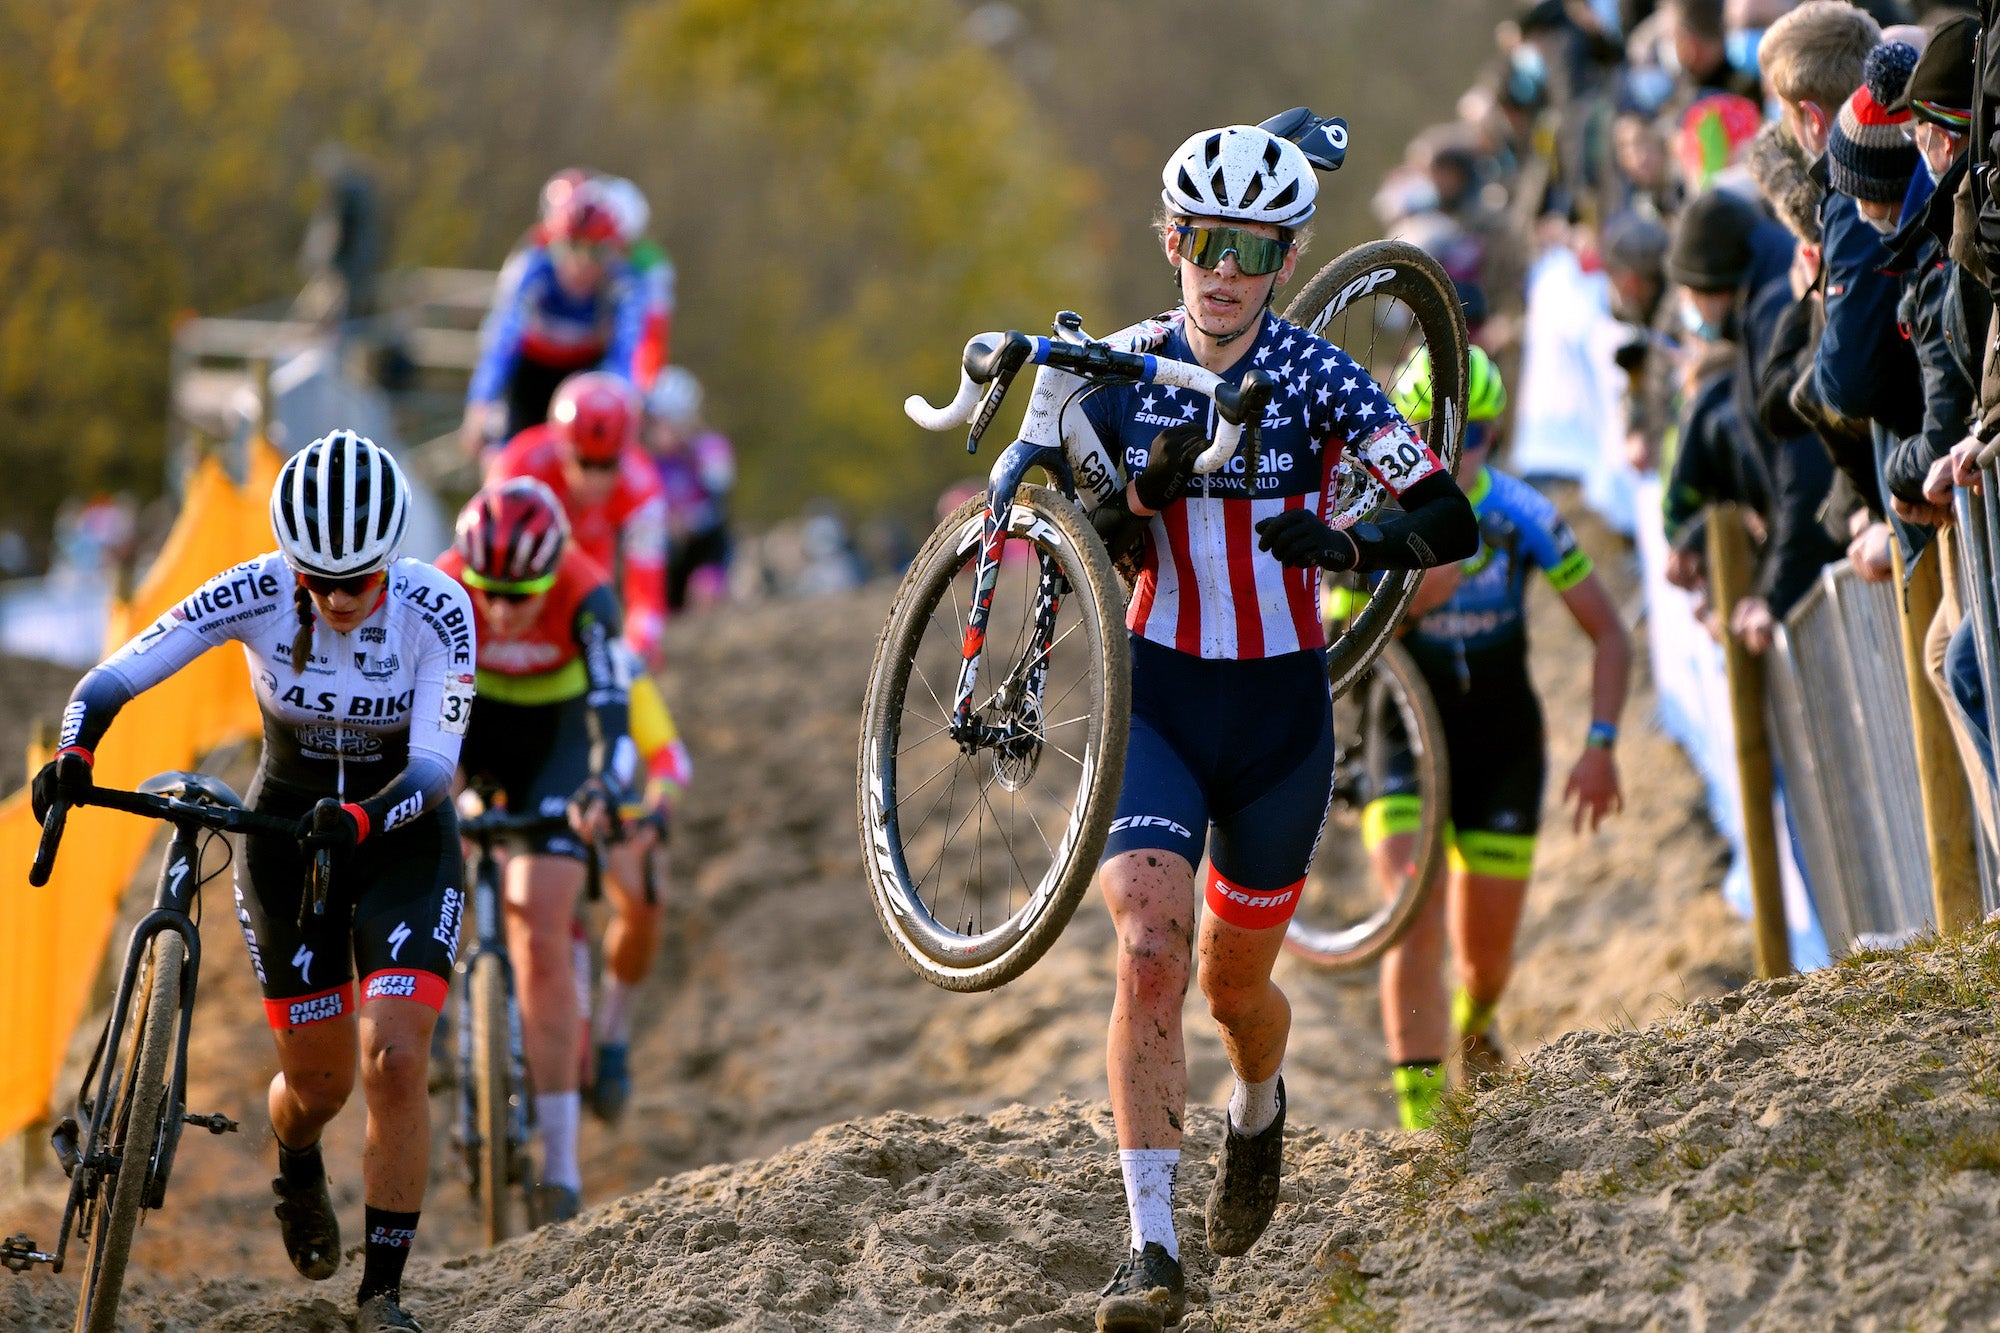 How to watch the 2022 world cyclocross championships